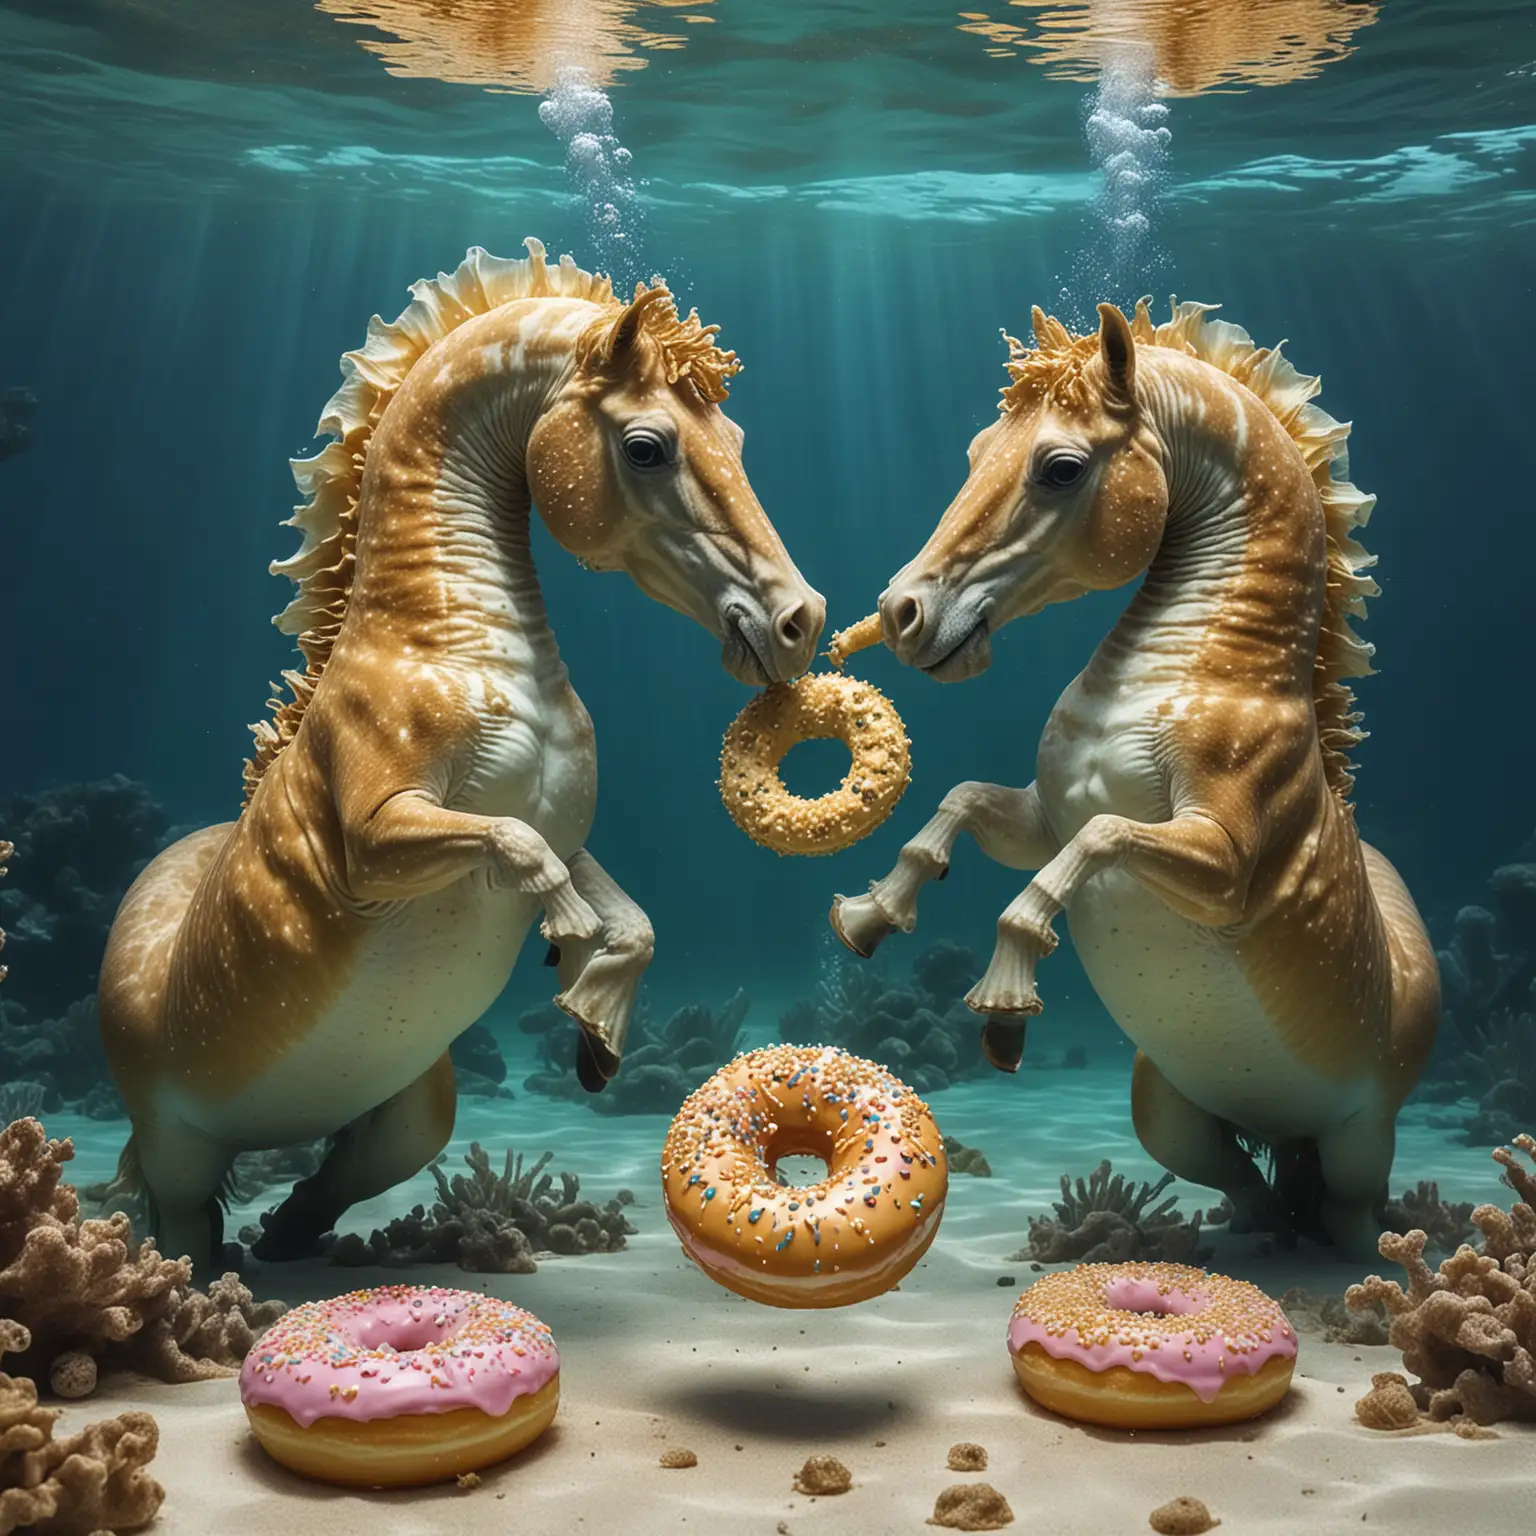 Underwater Sea Horses Enjoying Donuts Playful Scene with Vibrant Blues and Golden Hues